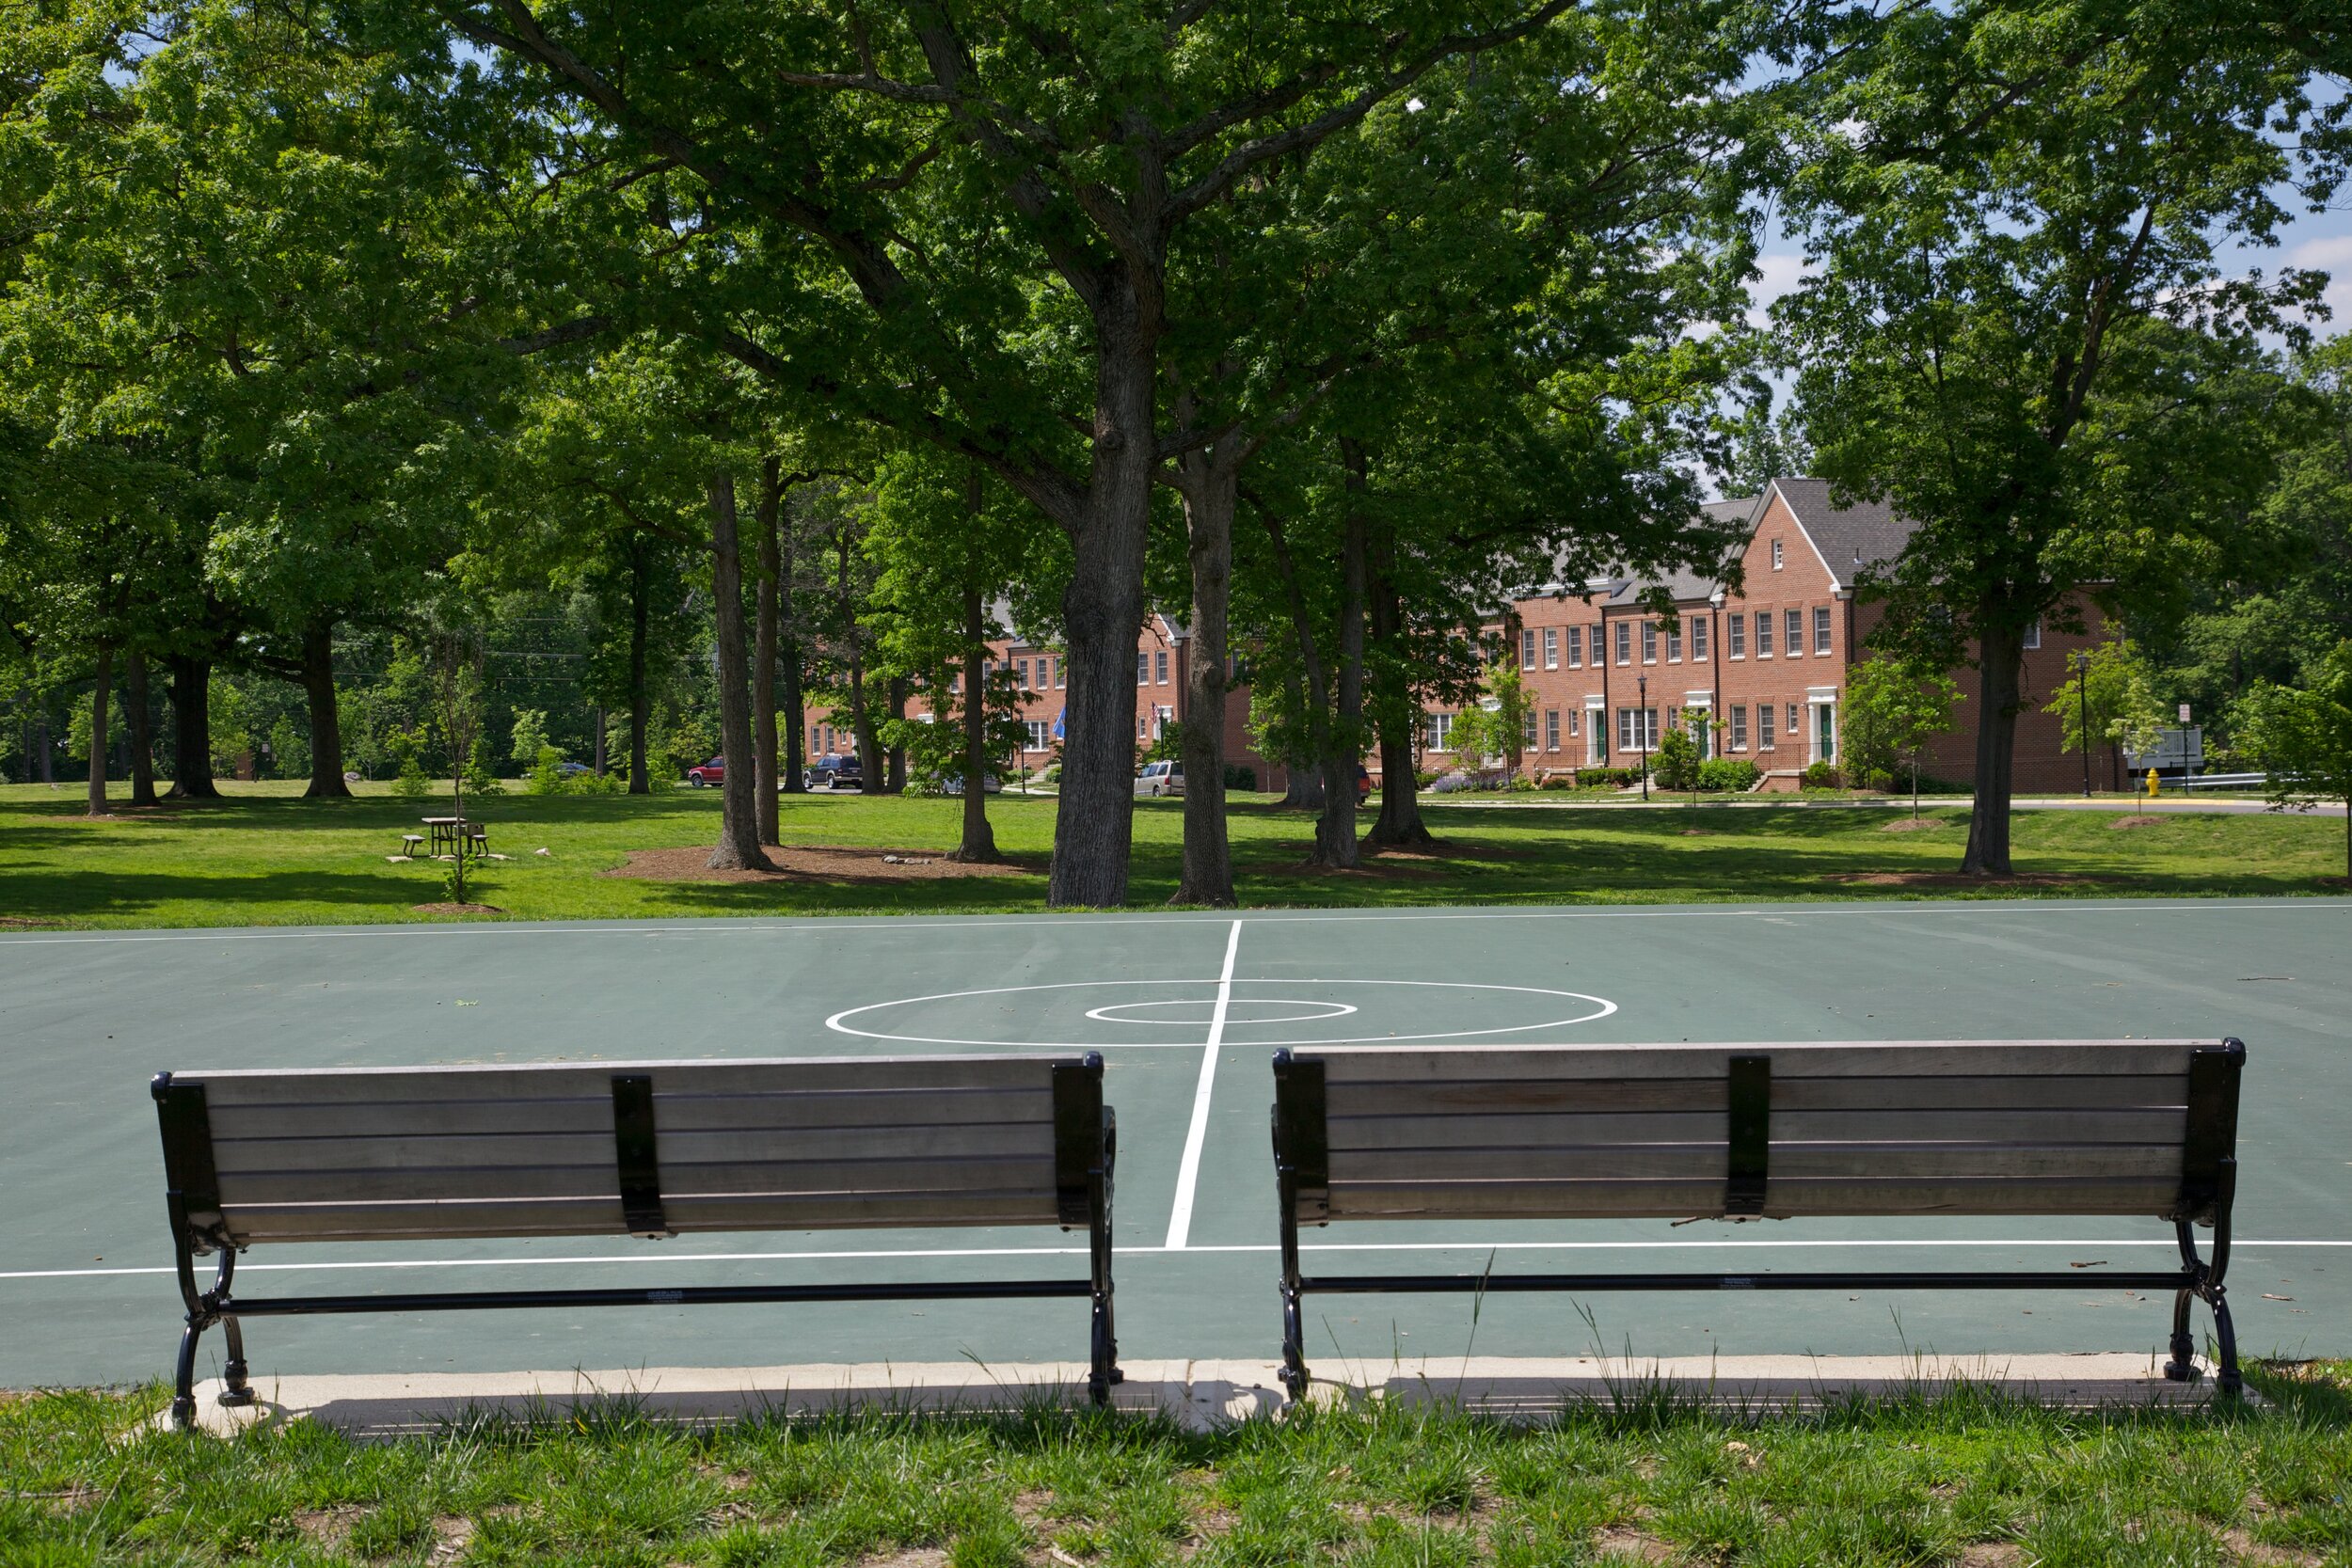 Residents enjoy playing pick-up games at the community basketball court.